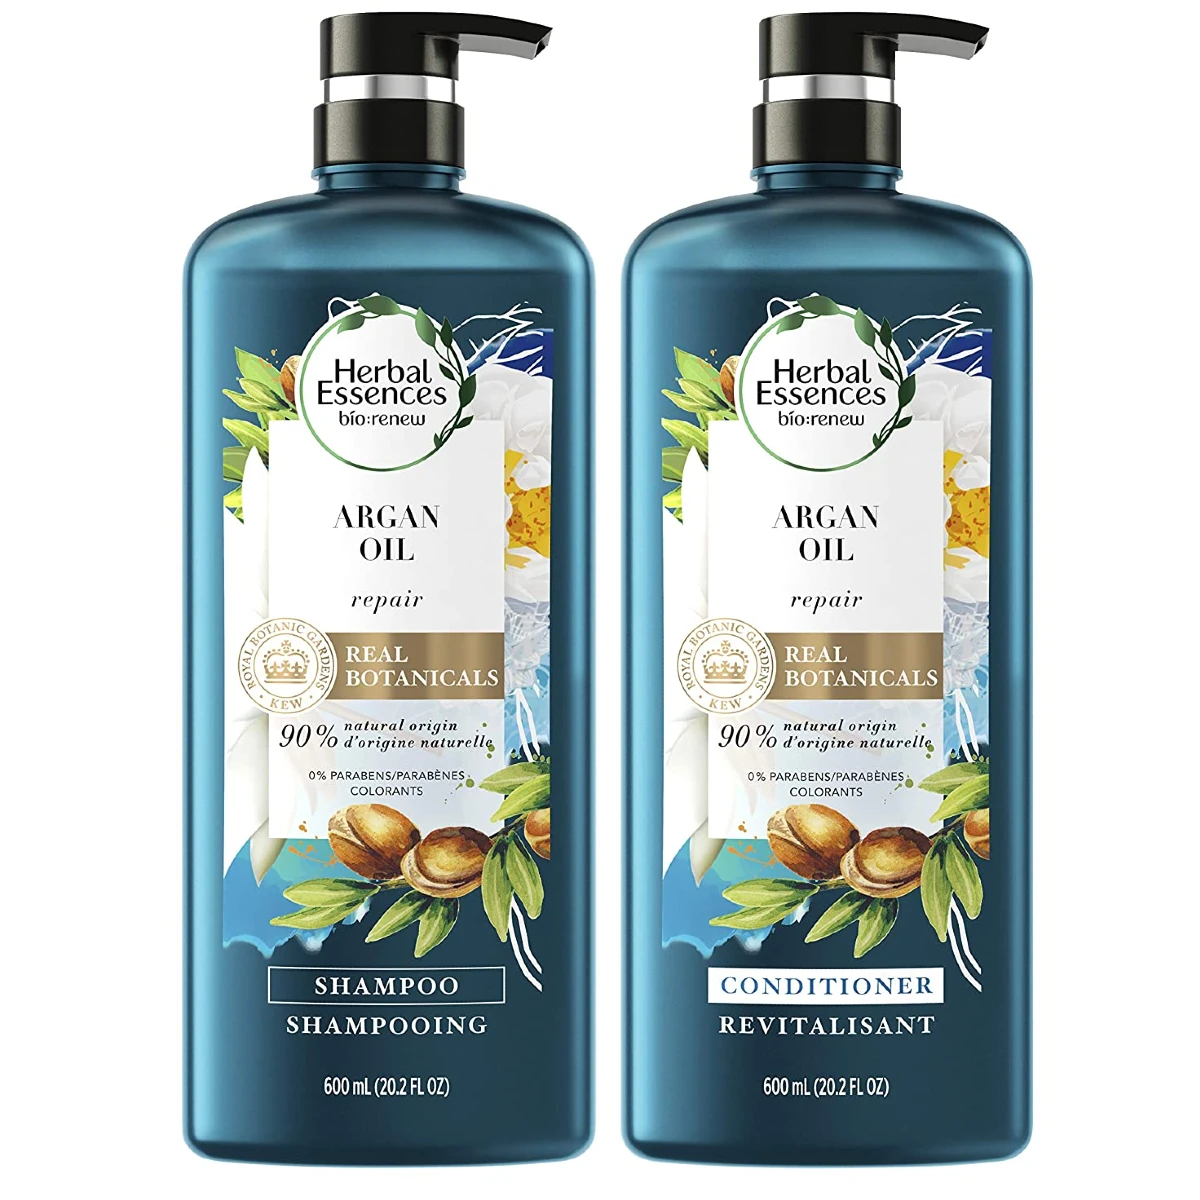 Herbal Essences Repairing Argan Oil of Morocco Shampoo and Conditioner Set with Natural Source Ingredients